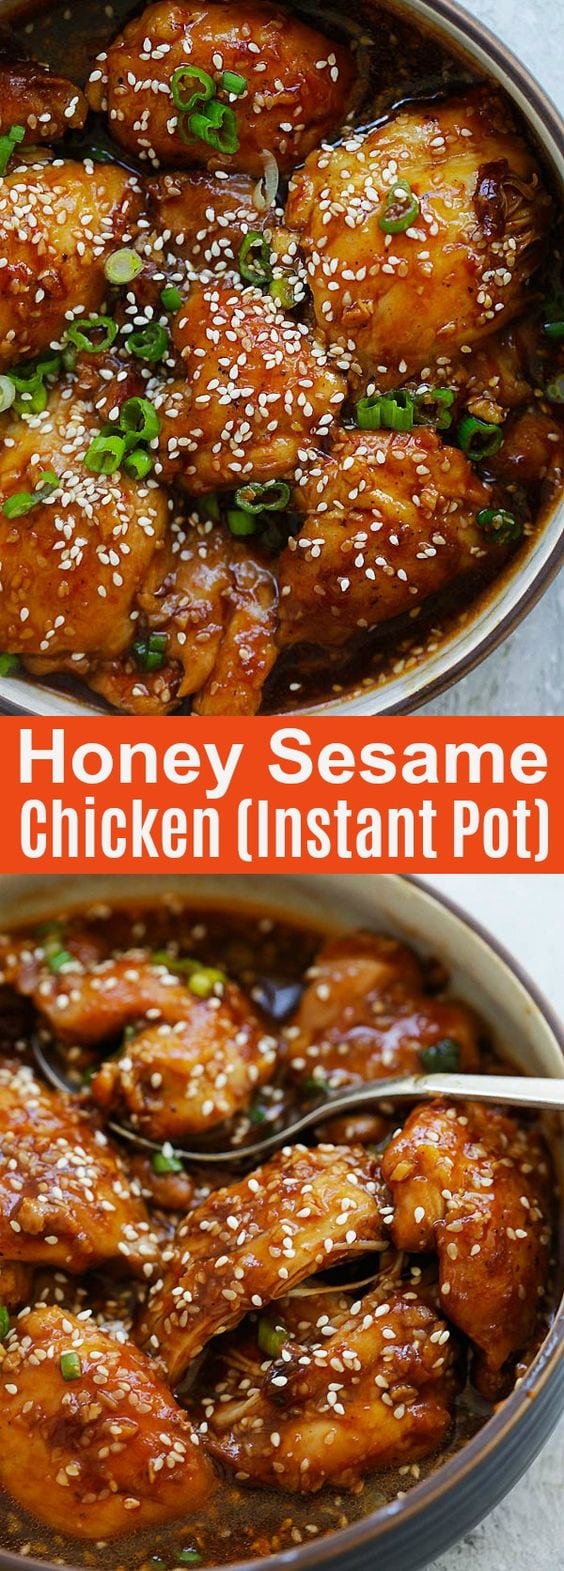 Instant Pot Honey Sesame Chicken - crazy delicious and easy Instant Pot recipe with chicken, sticky sweet and savory honey sauce with sesame! This juicy, tender, moist chicken will be an instant hit | rasamalaysia.com